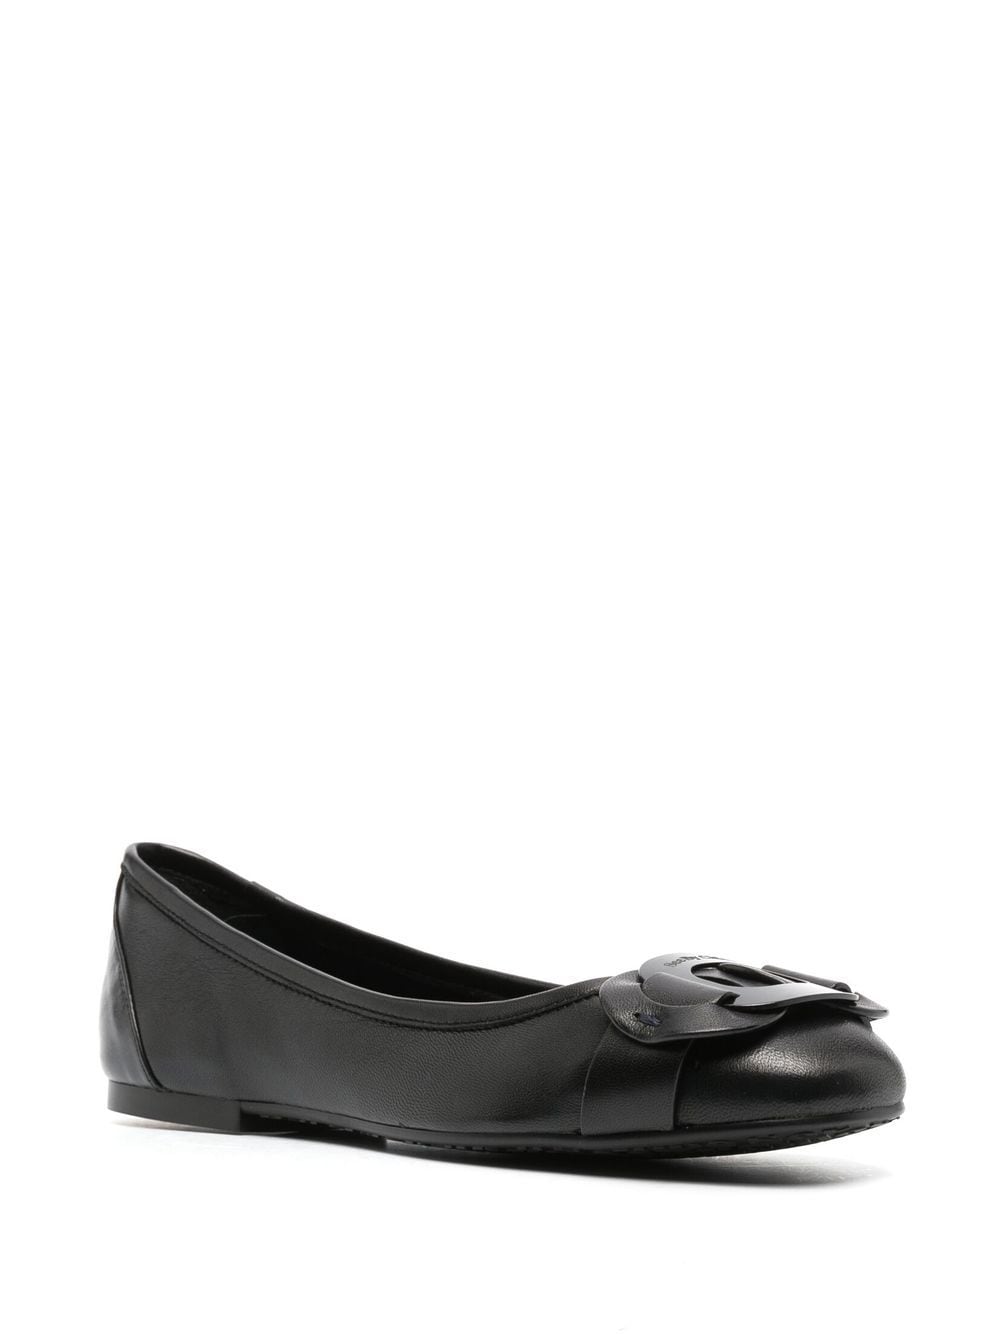 See By Chloé Channy logo-plaque Ballerina Shoes - Farfetch